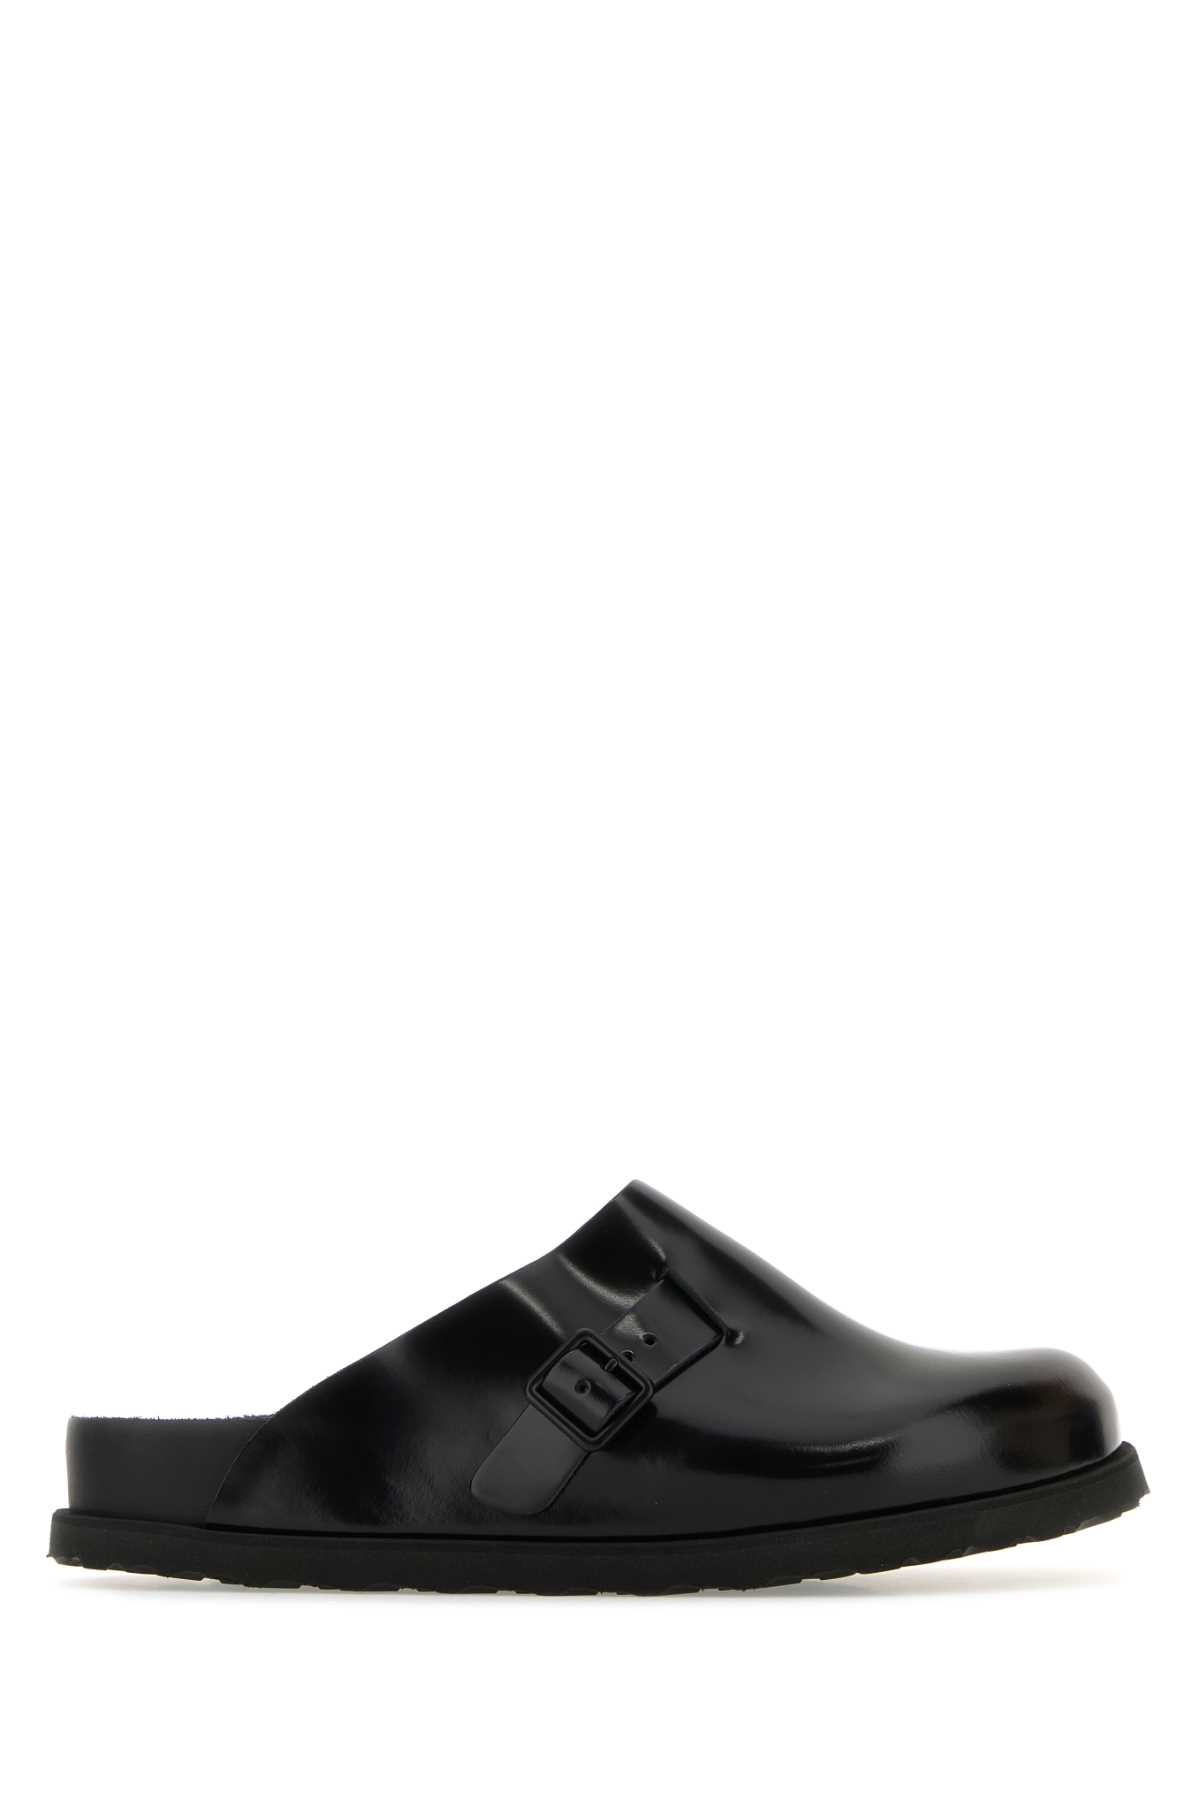 Black Leather 33 Dougal Slippers